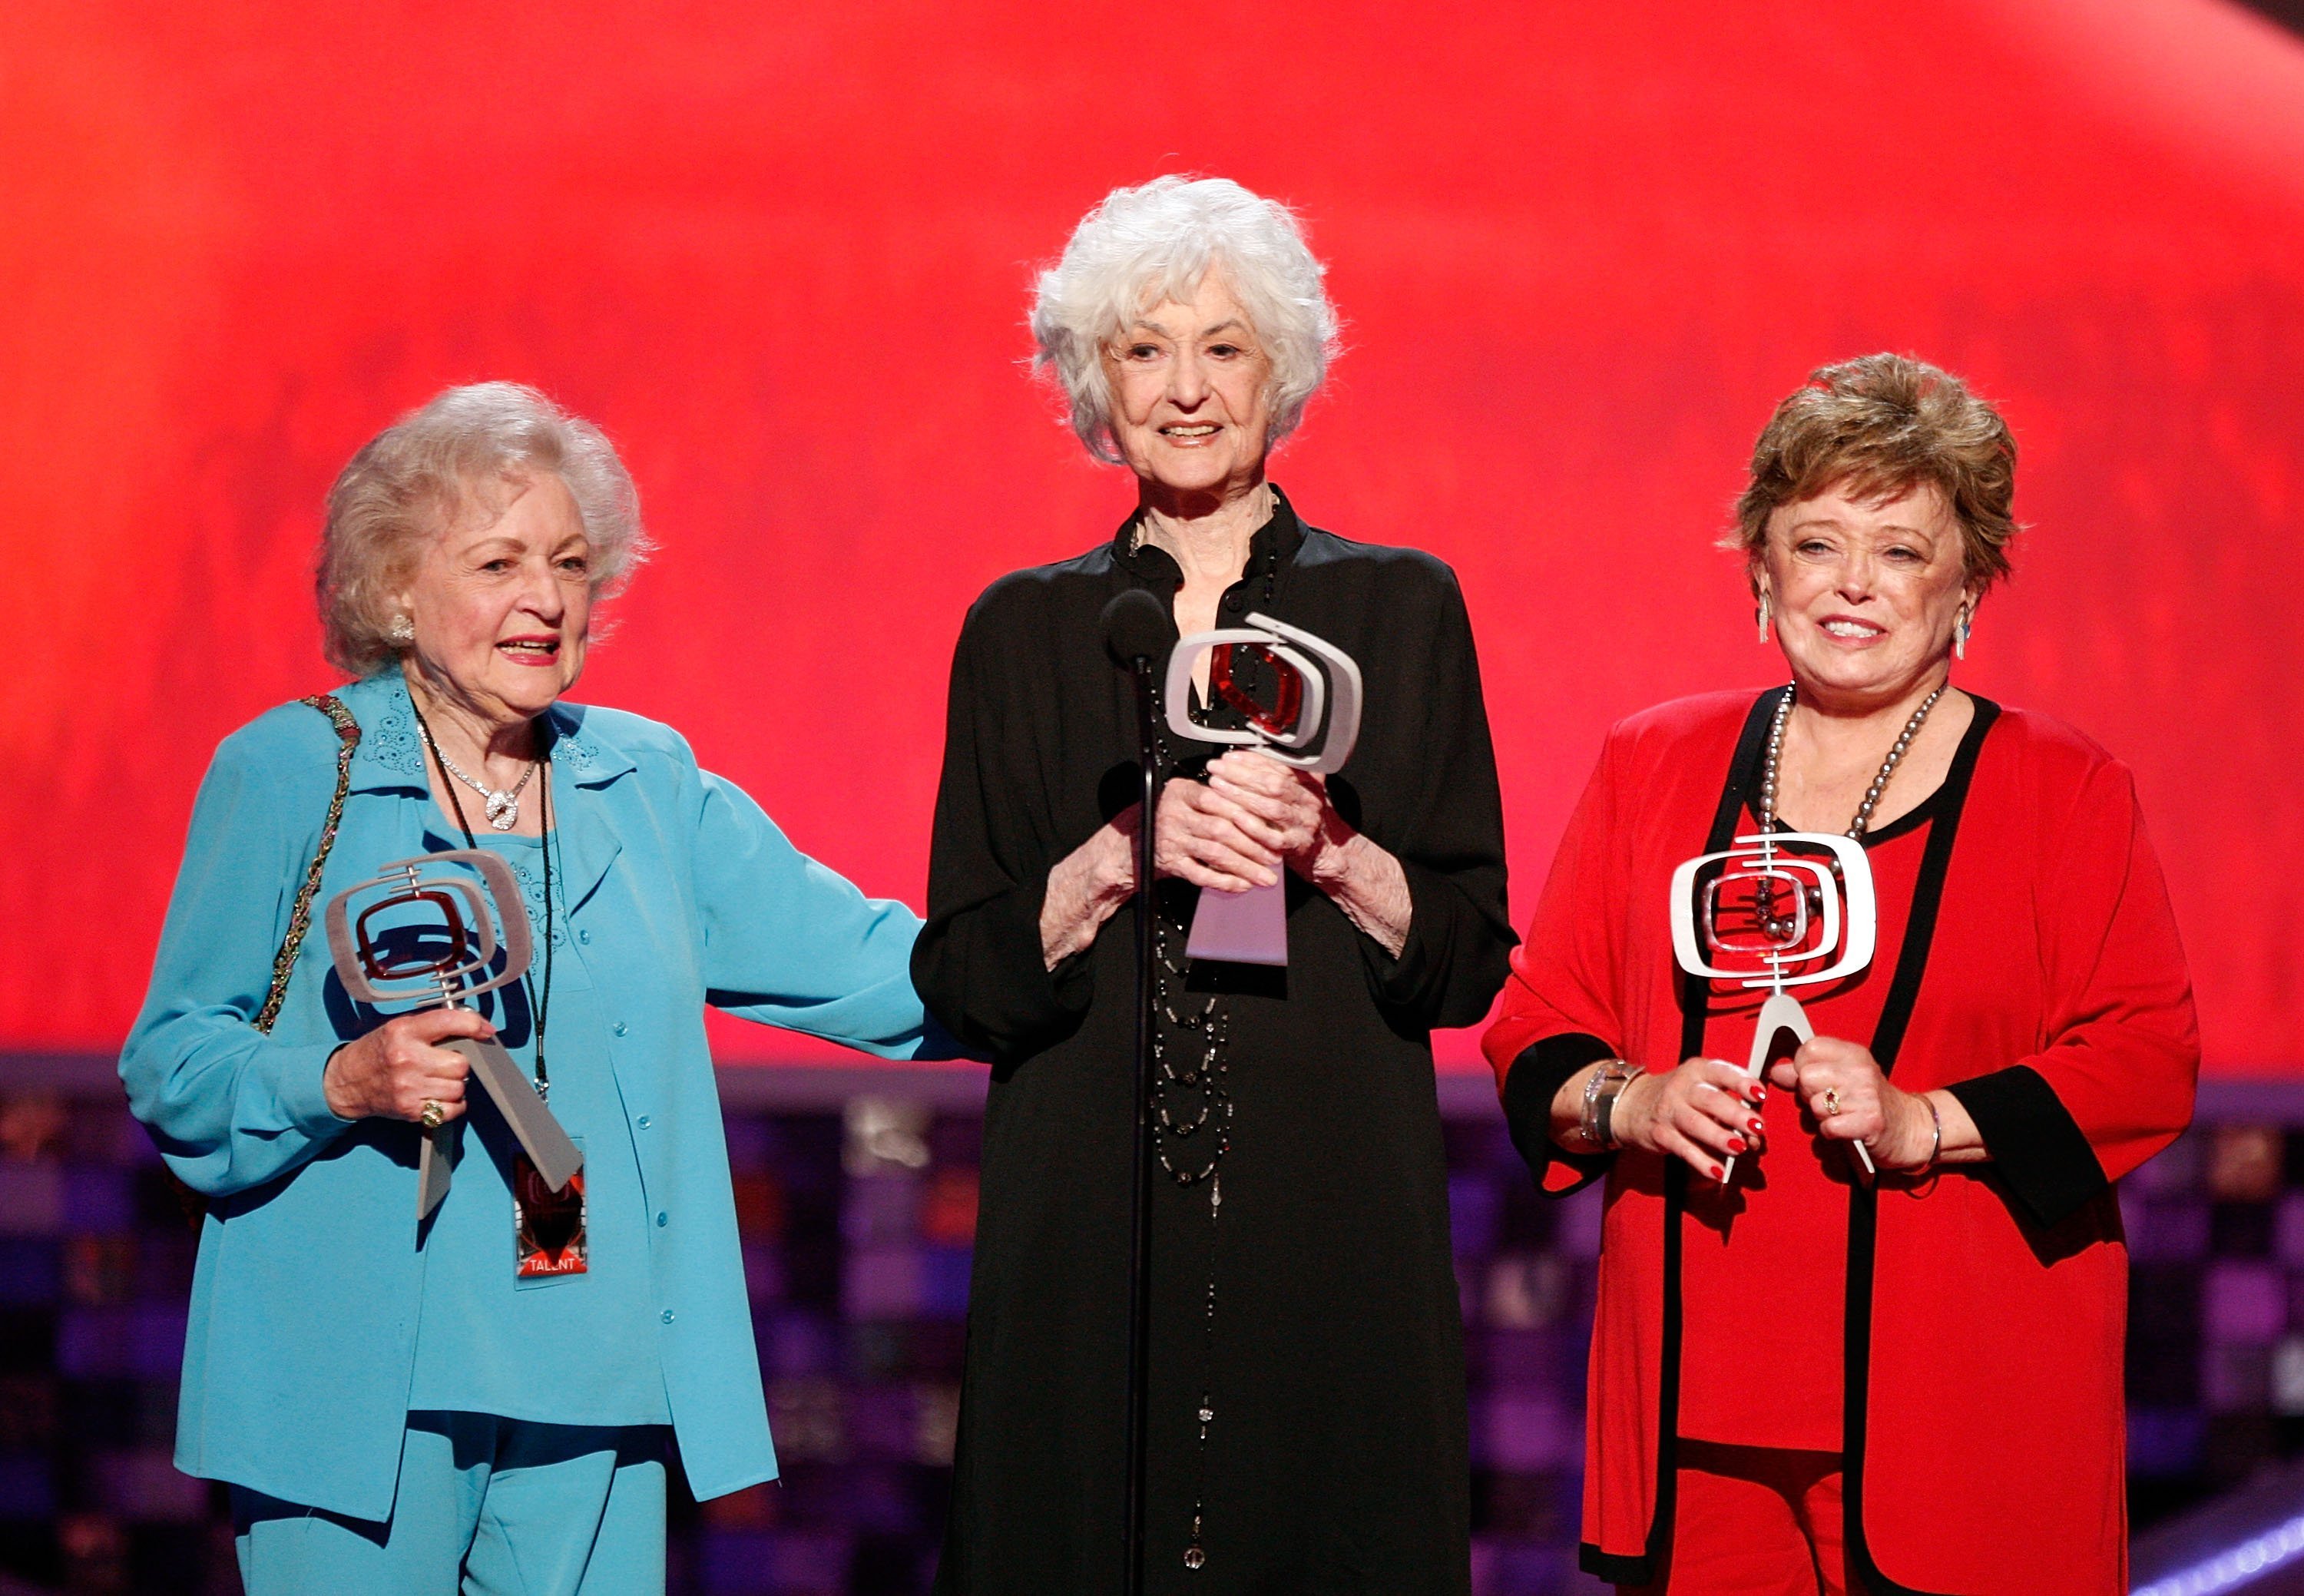 Betty White, Bea Arthur, and Rue McClanahan accept the Pop Culture Award onstage during the 6th annual "TV Land Awards" on June 8, 2008, in Santa Monica, California. | Source: Getty Images.